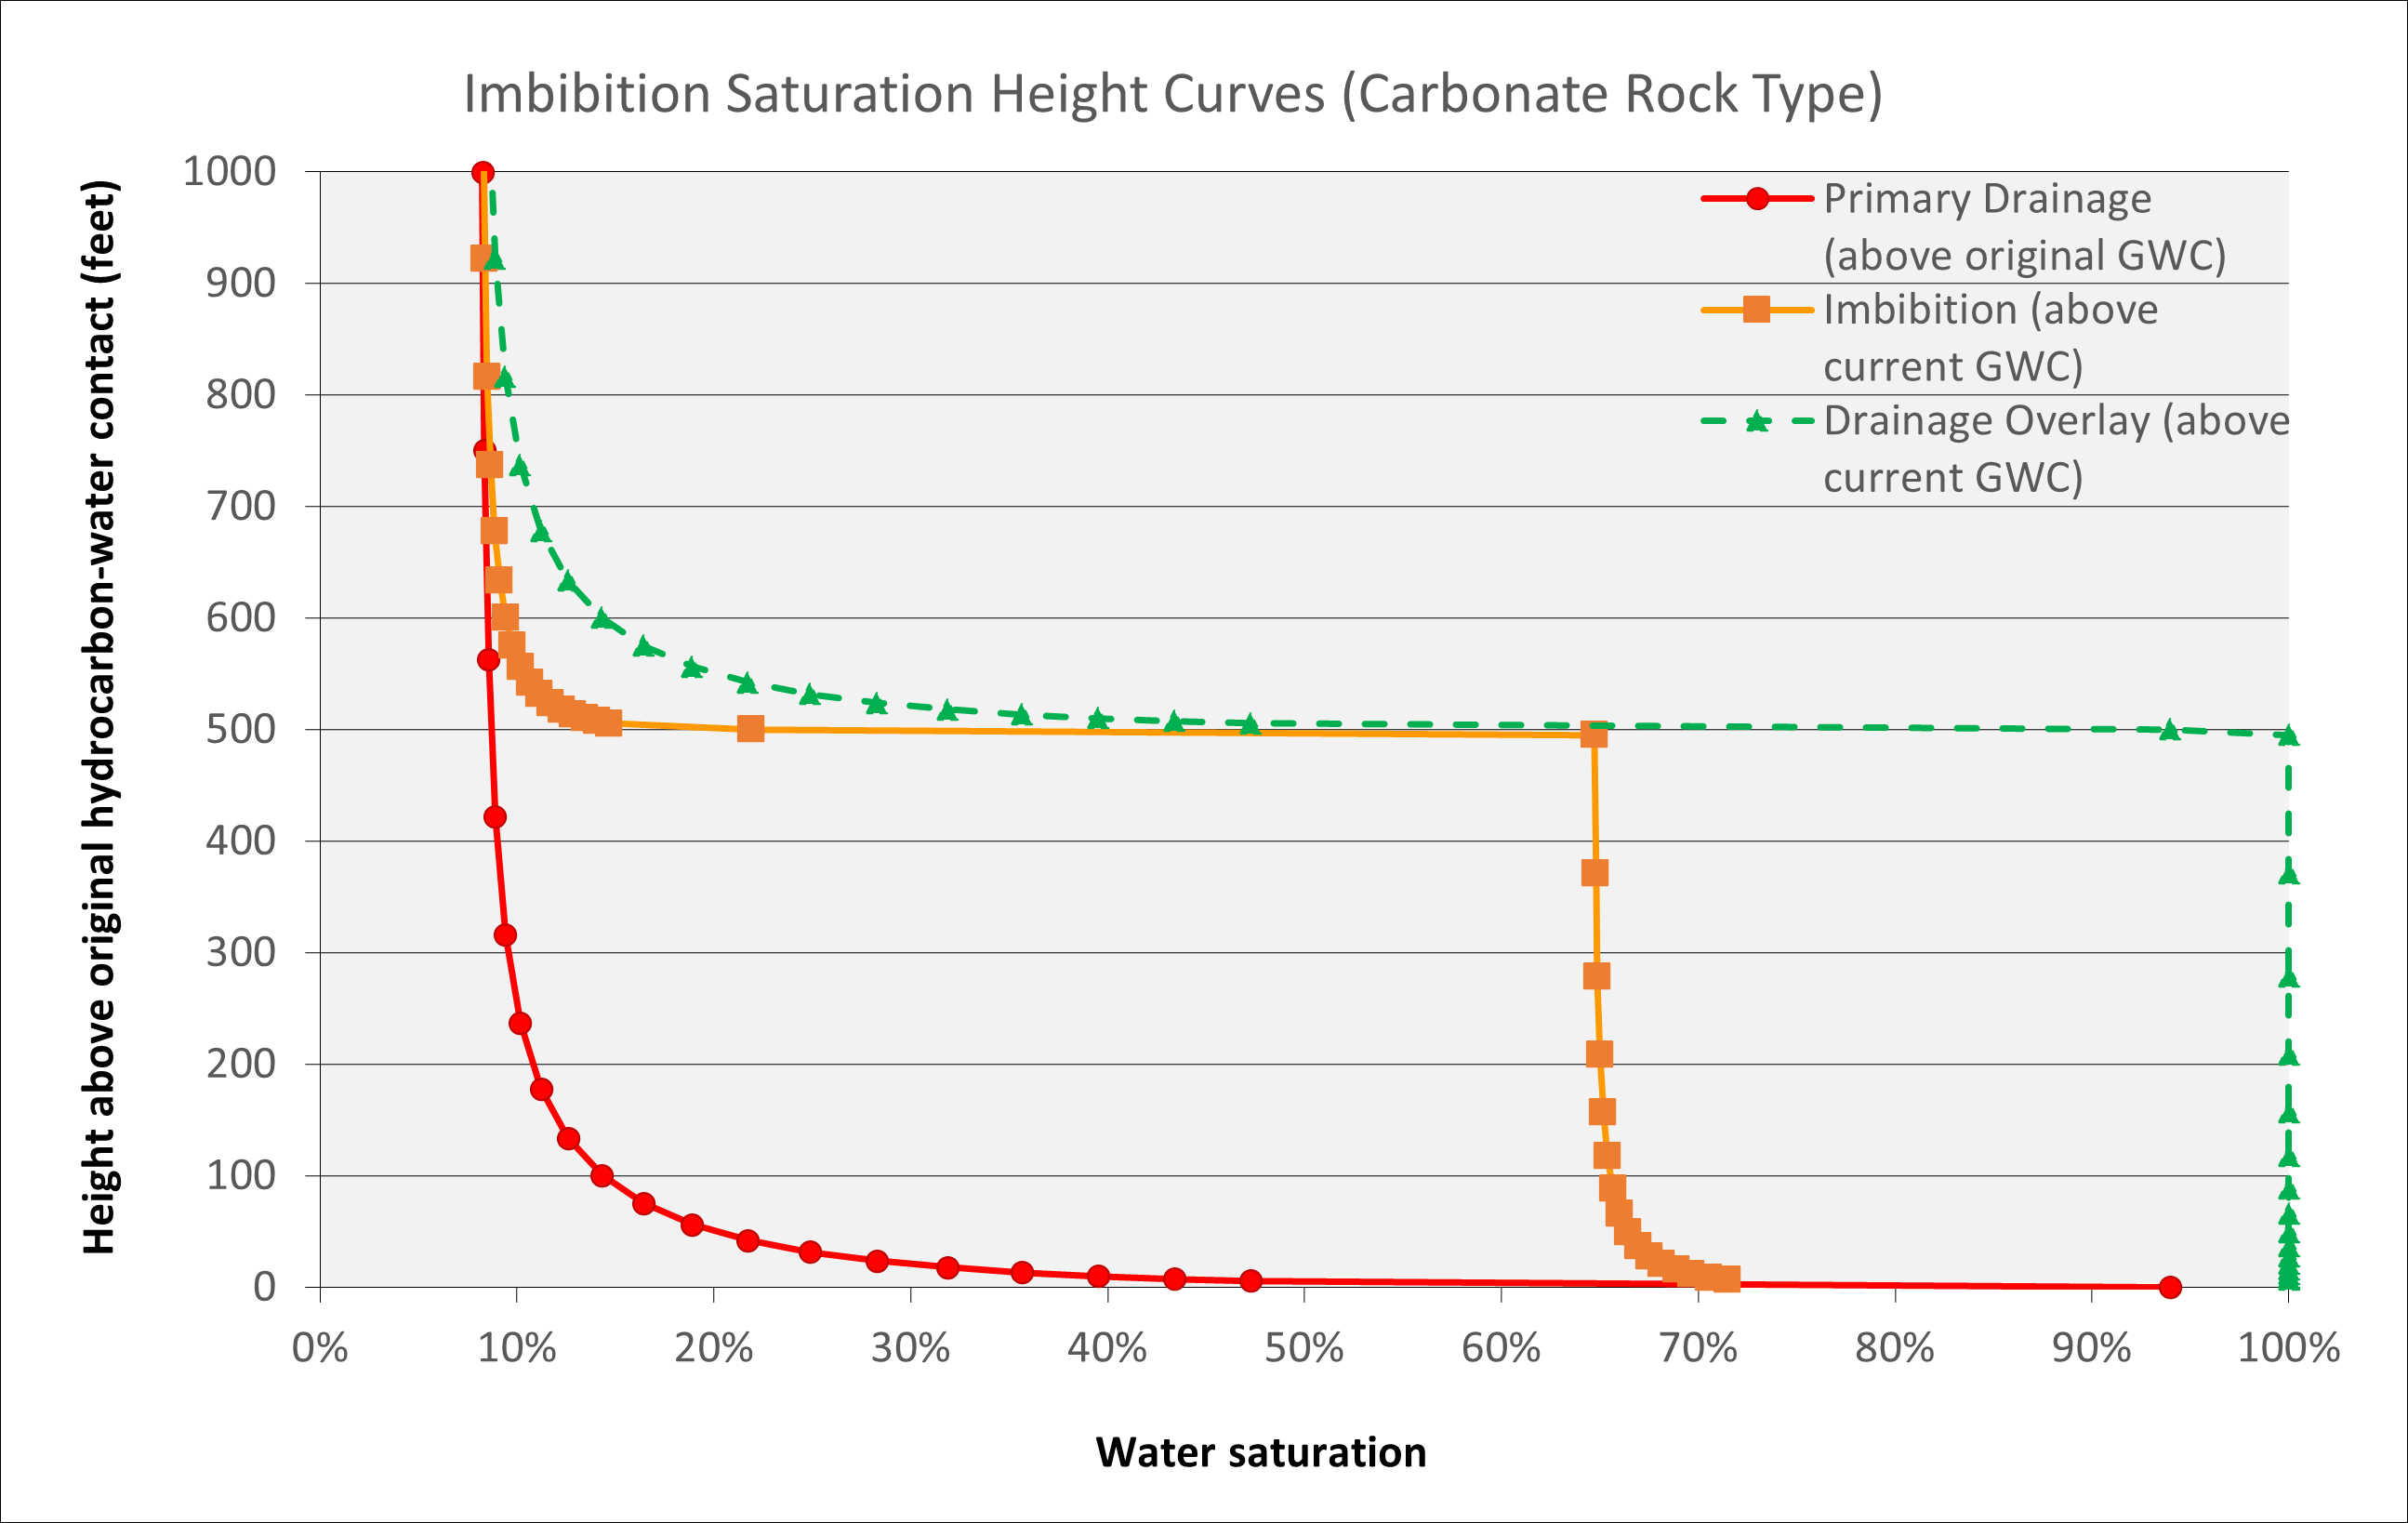 Imbibition saturation curve arising from rise in contact to current location from deeper paleo contact depth.